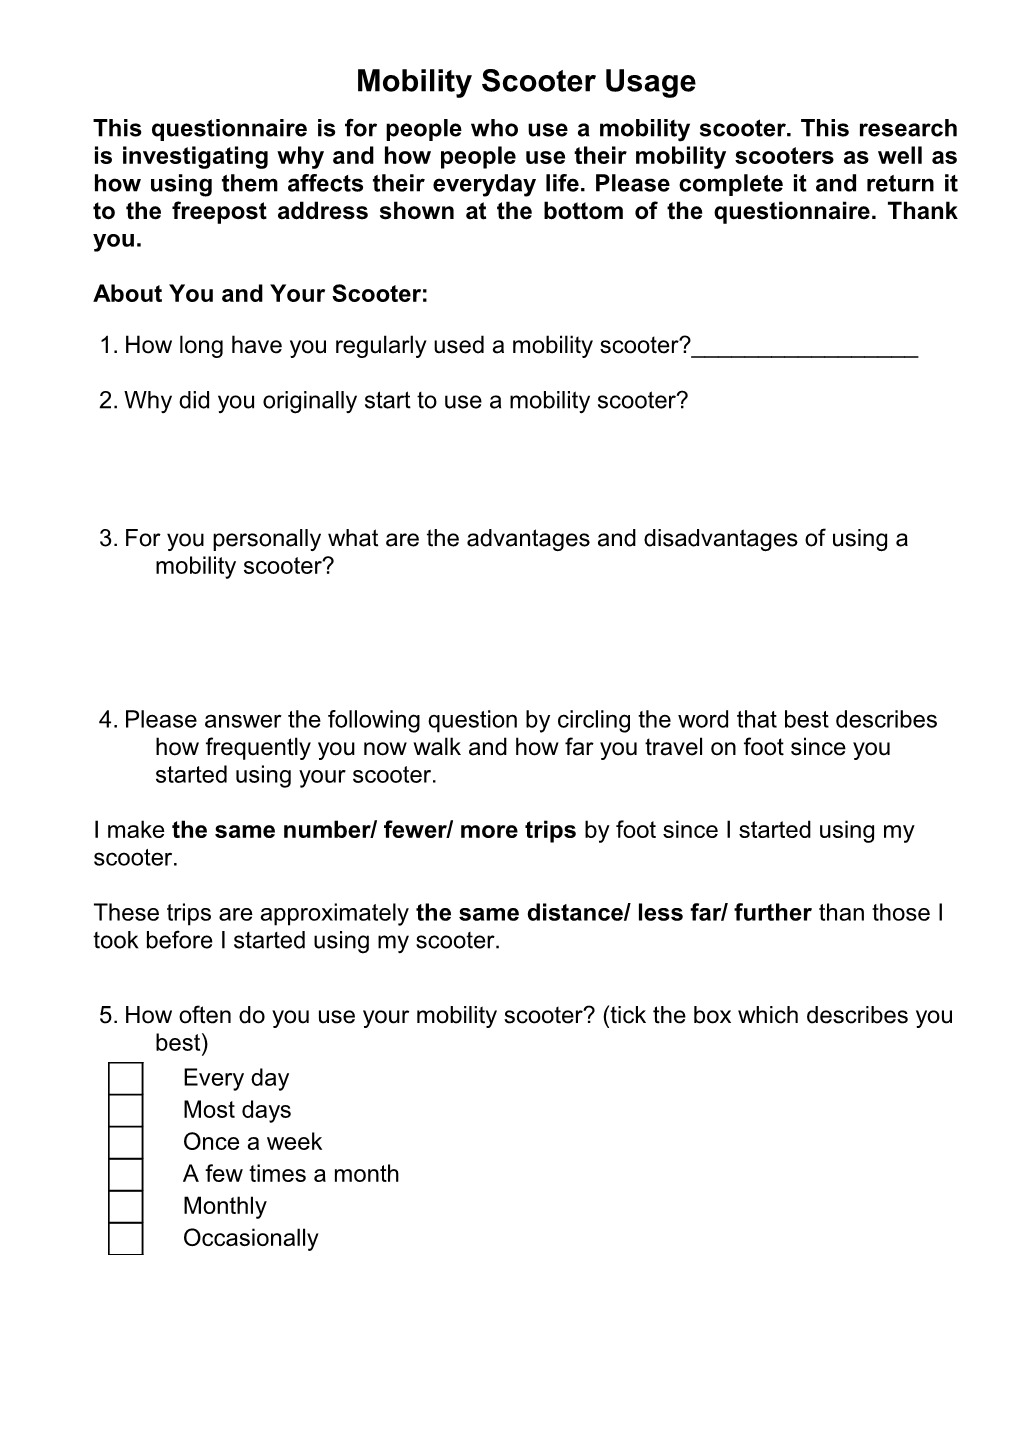 This Questionnaire Aims to Understand Why and How People Use Their Mobility Scooters